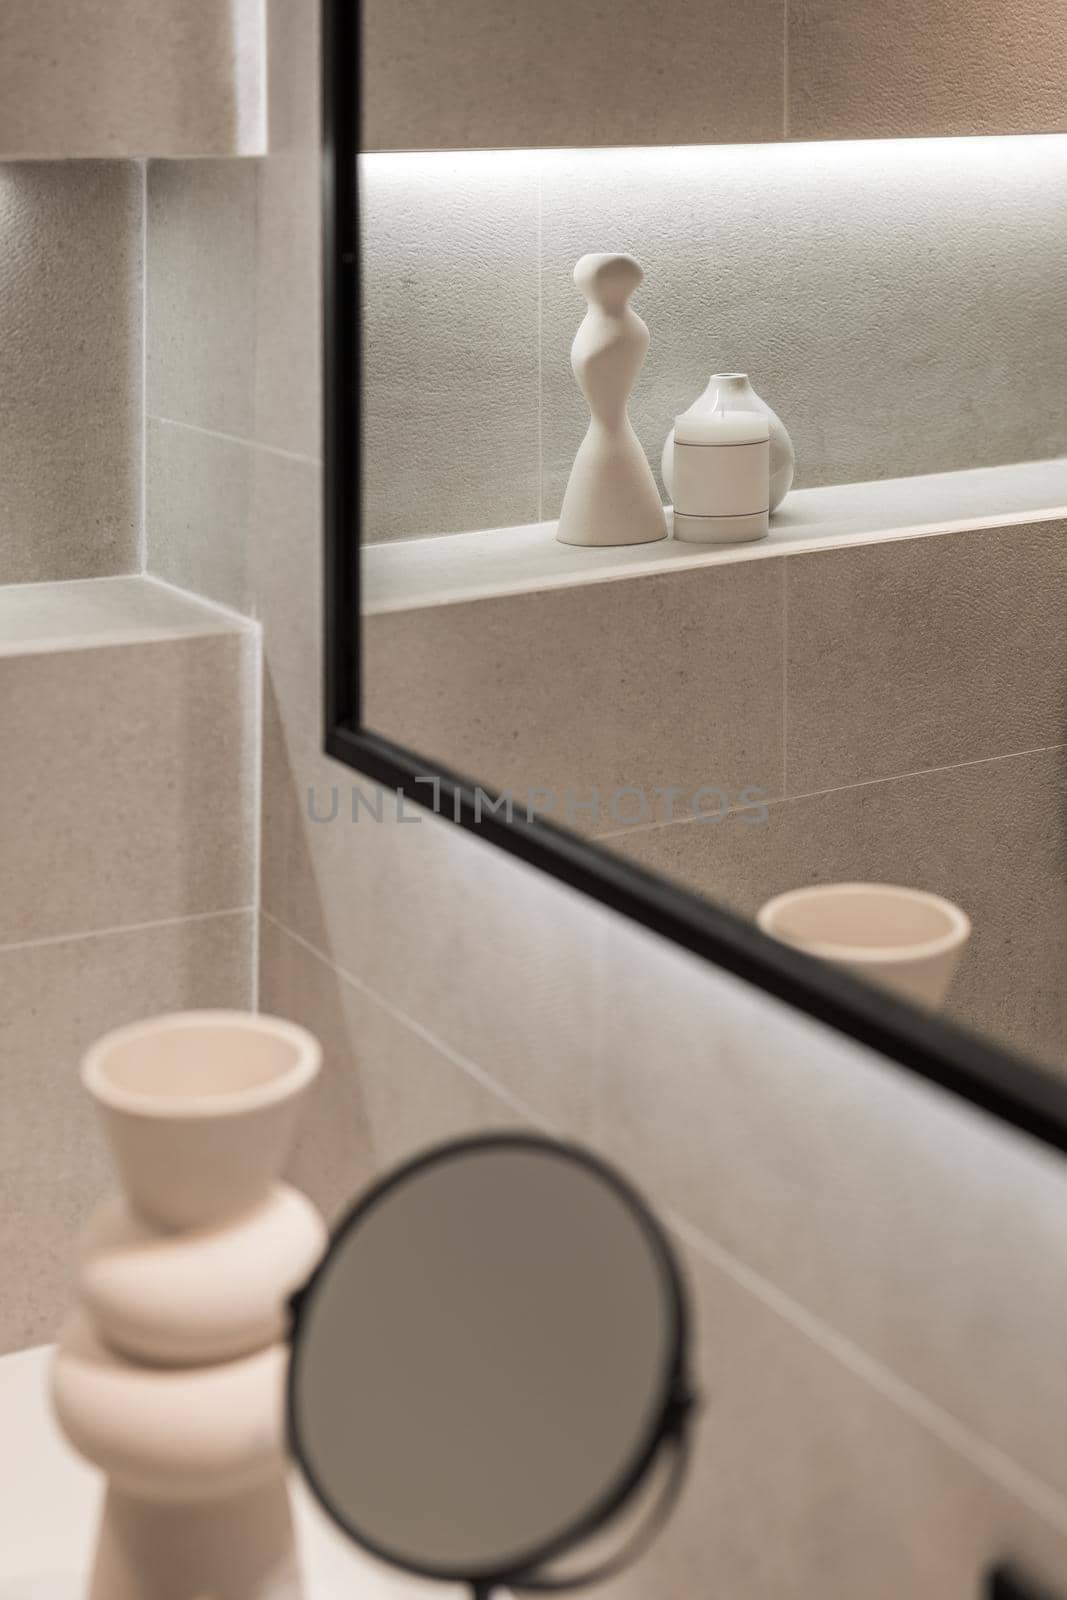 Modern bathroom interior with mirror and decorative elements in reflection. Minimalist style. Selective focus by apavlin